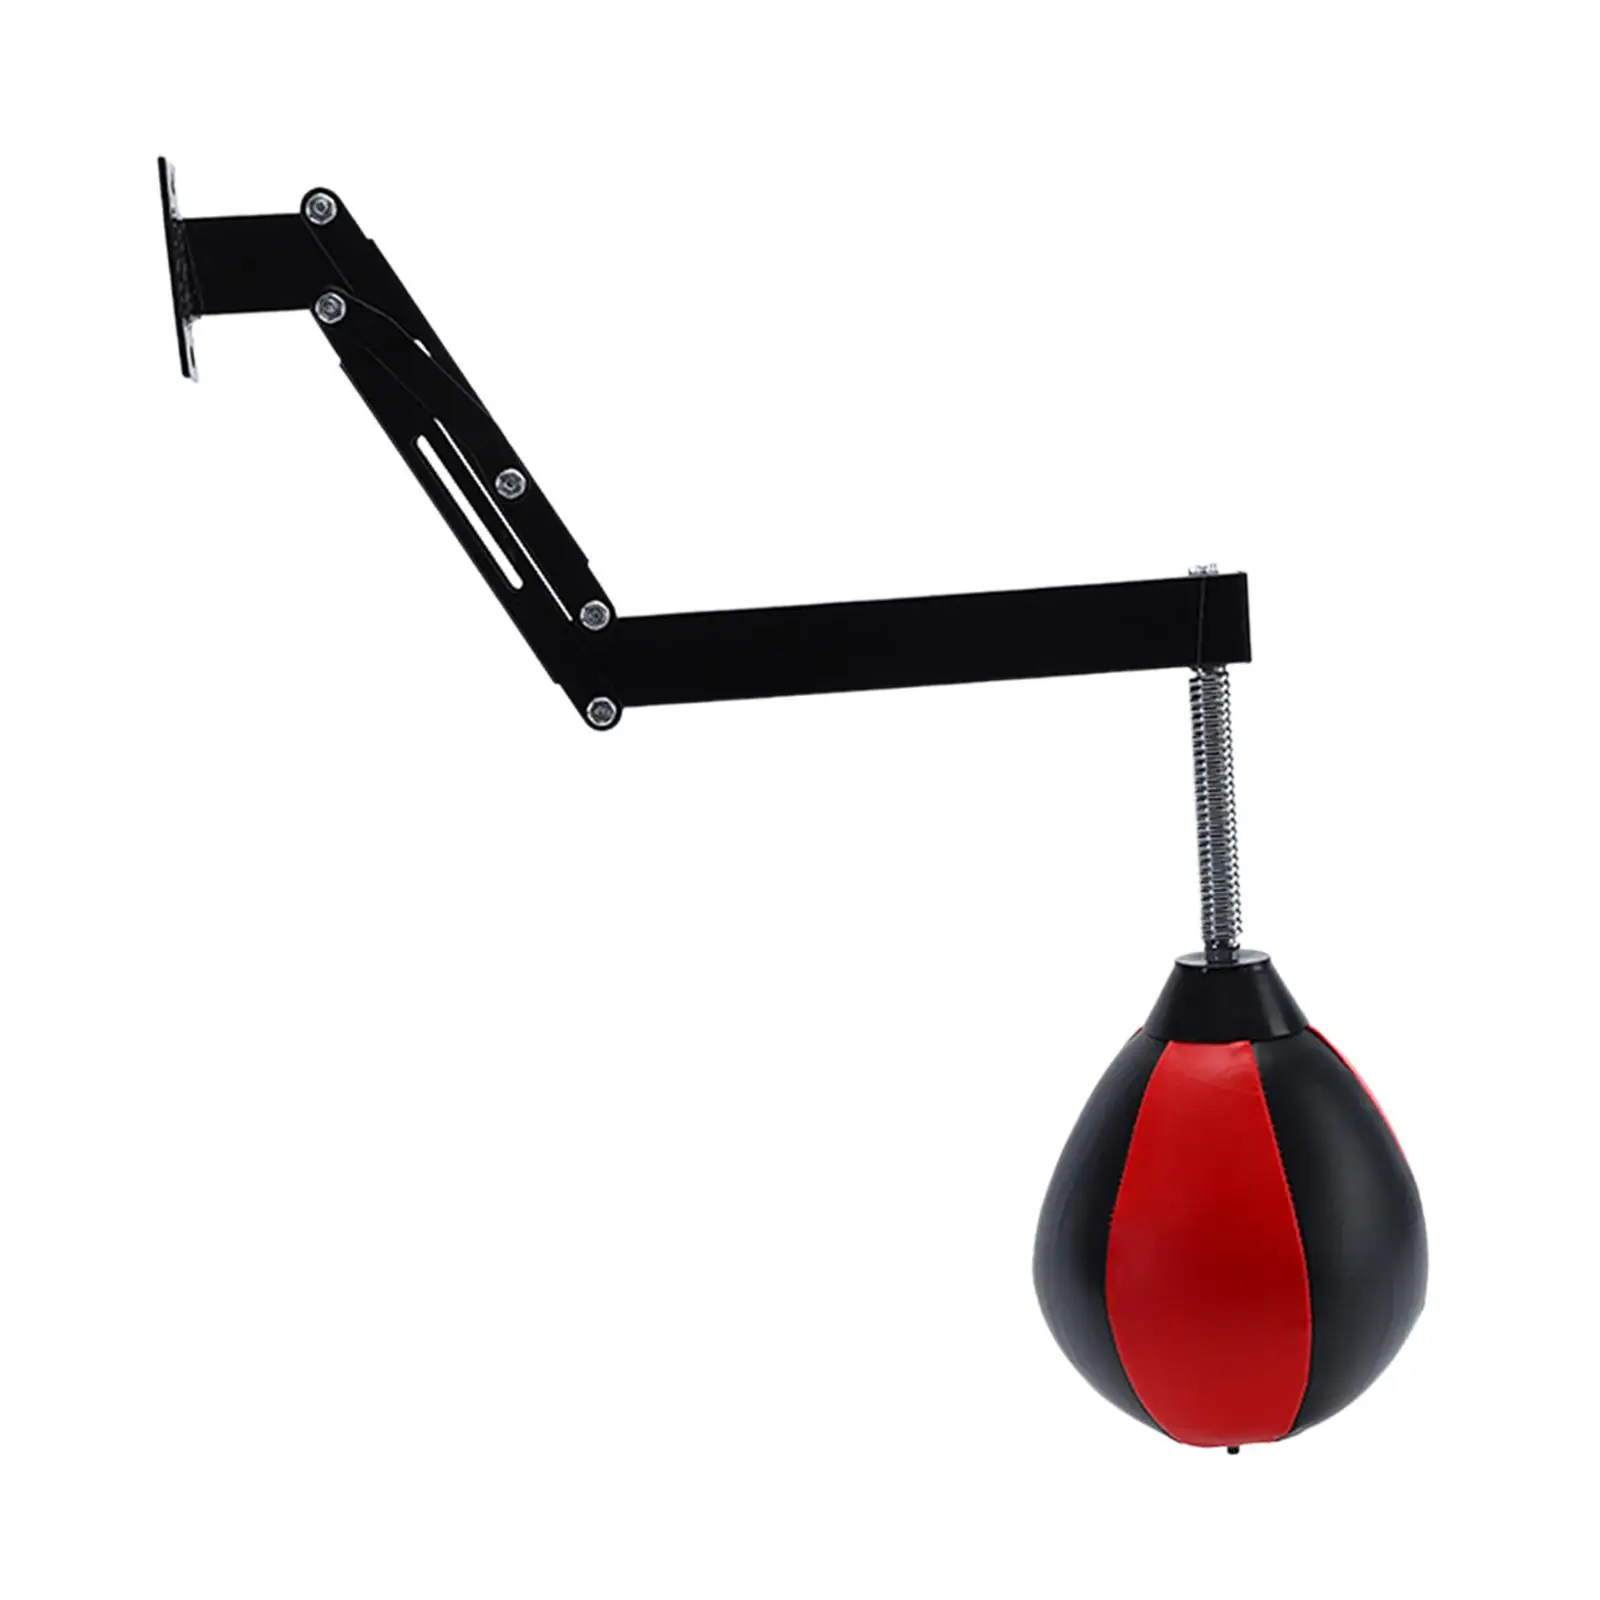 Speed Bag Height Adjustable Heavy Duty Inflatable Wall Mount Boxing Punching Bag for Fitness Sparring Training